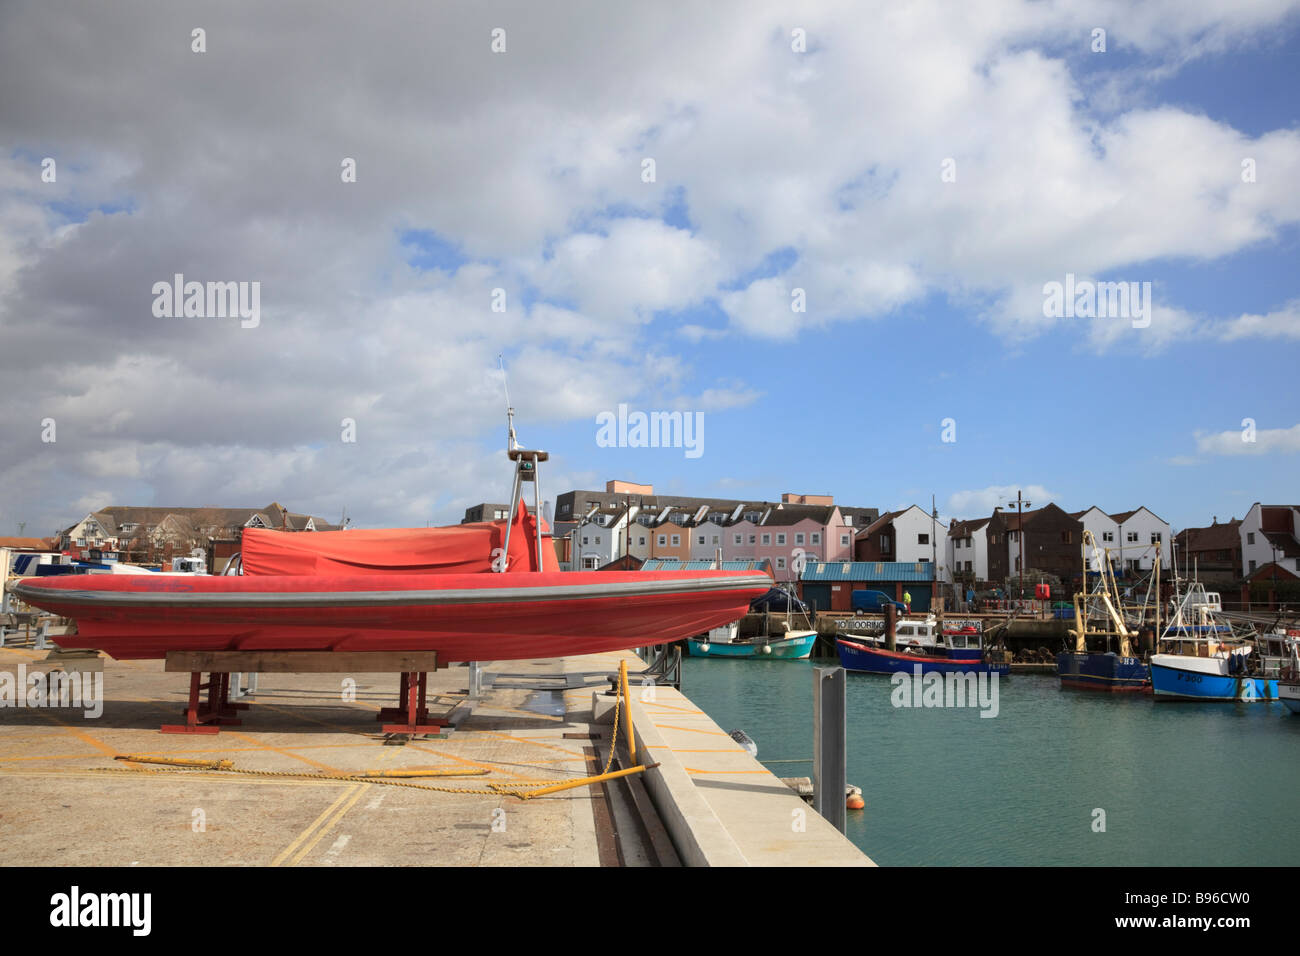 A rigid inflatable boat on the dockside in Old Portsmouth Stock Photo